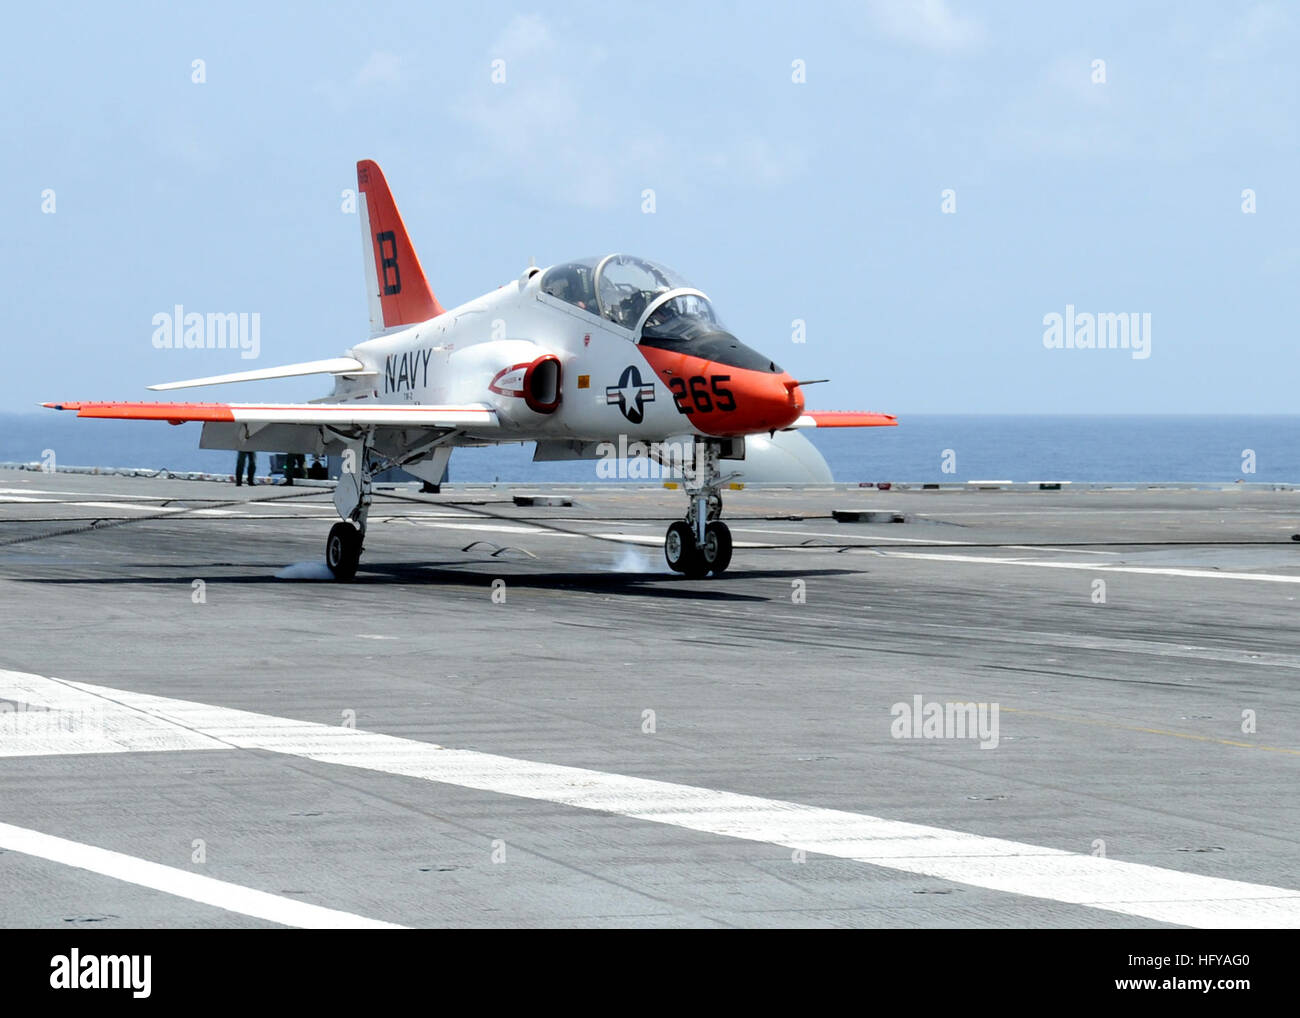 100717-N-6632S-055  ATLANTIC OCEAN (July 17, 2010) A T-45C Goshawk training aircraft assigned to Training Wing (TRAWING) 2 lands aboard the aircraft carrier USS George H.W. Bush (CVN 77). George H.W. Bush is conducting training operations in the Atlantic Ocean. (U.S. Navy photo by Mass Communication Specialist Seaman Kevin J. Steinberg/Released) US Navy 100717-N-6632S-055 A T-45C Goshawk training aircraft assigned to Training Wing (TRAWING) 2 lands aboard the aircraft carrier USS George H.W. Bush (CVN 77) Stock Photo